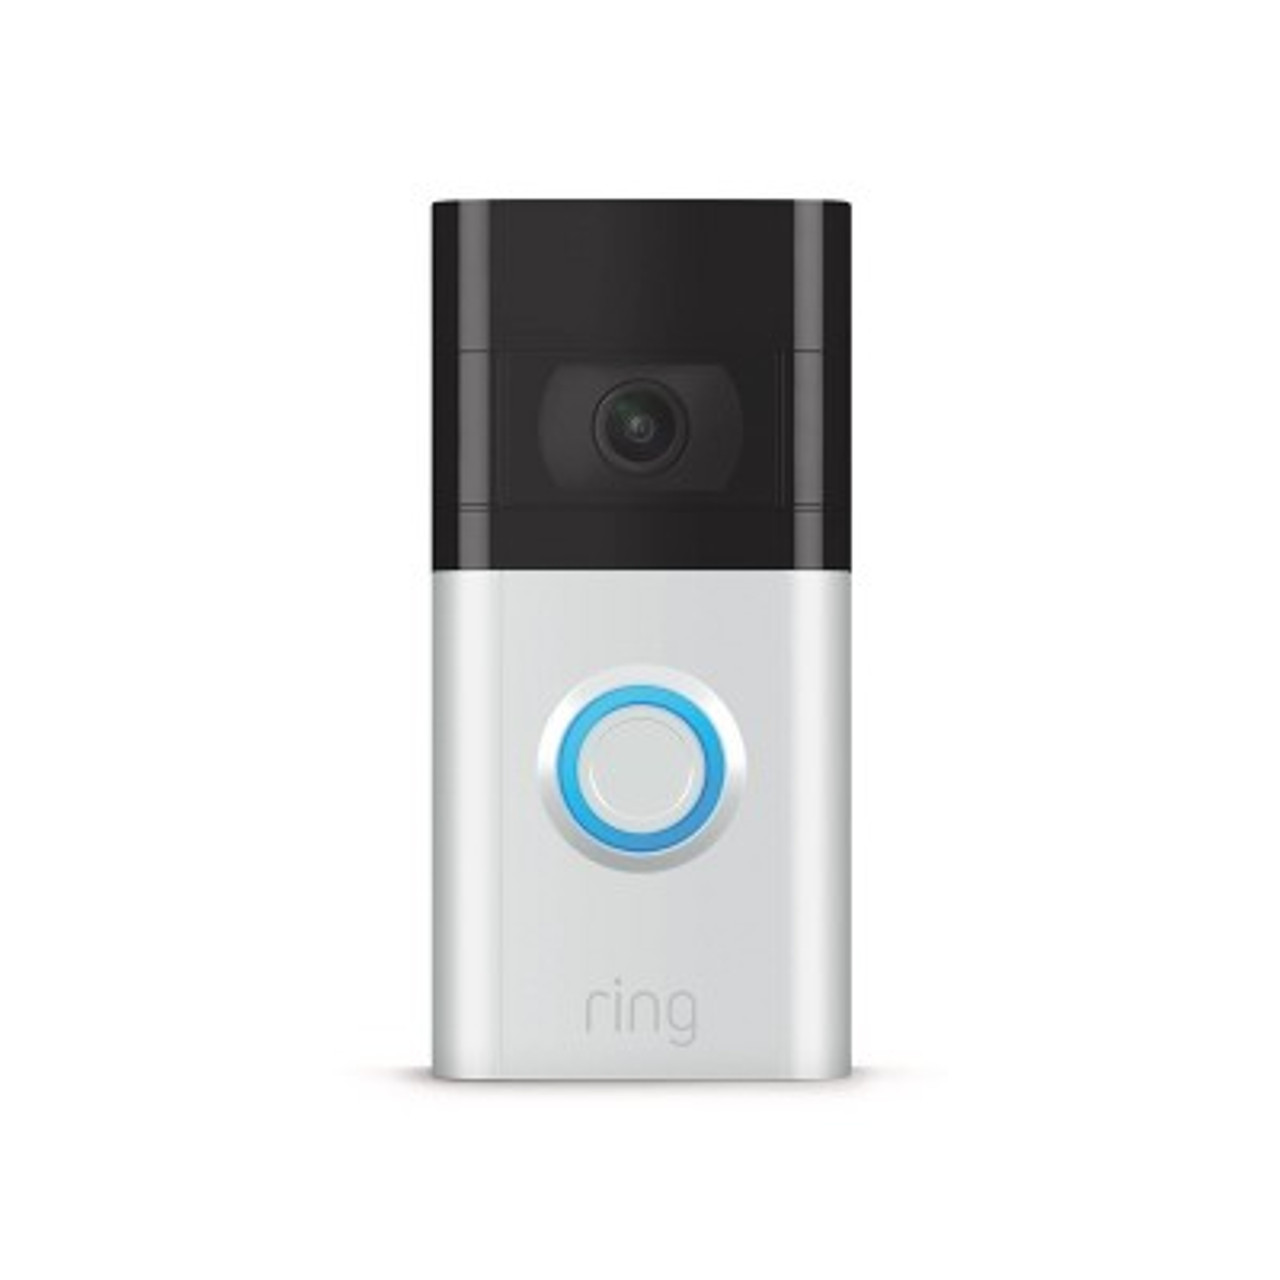 Ring 3 Wireless Video Doorbell 3rd Generation 1080P Night Vision Dual-Band WiFi 2-Way Voice + Free Shipping $49.99